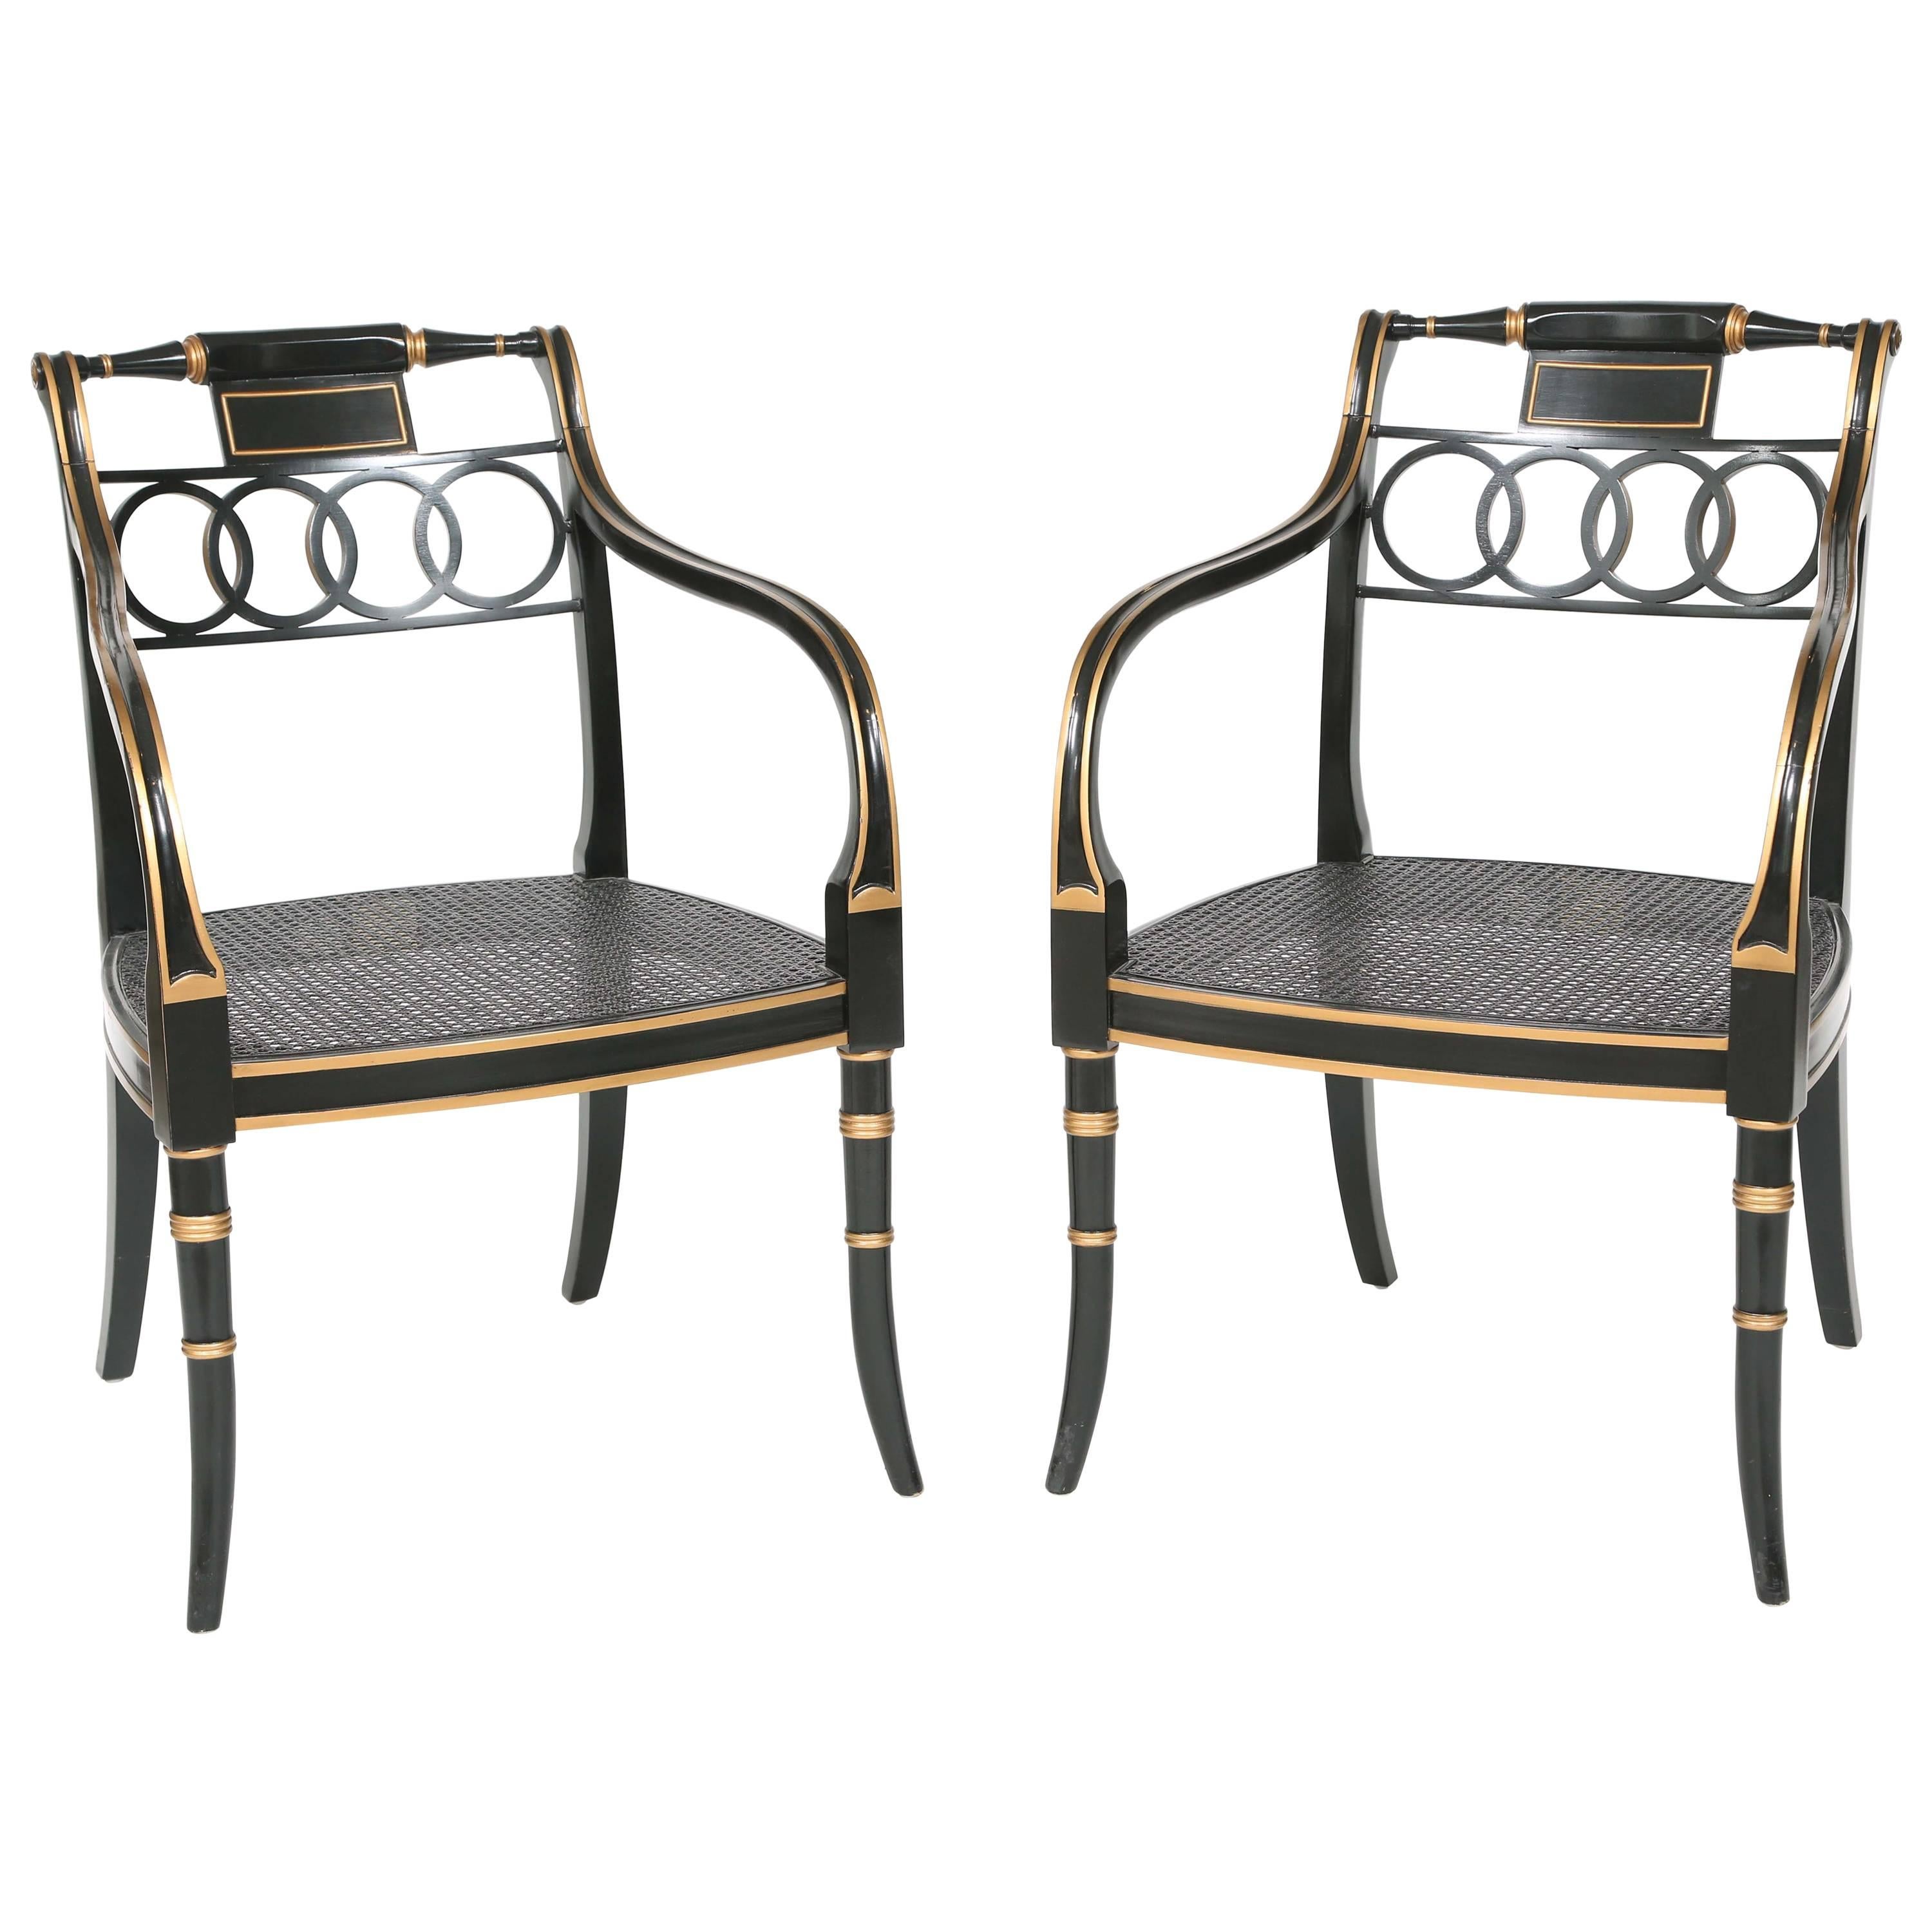 Pair of Lacquered and Parcel-Gilt Regency Style Armchairs by Baker